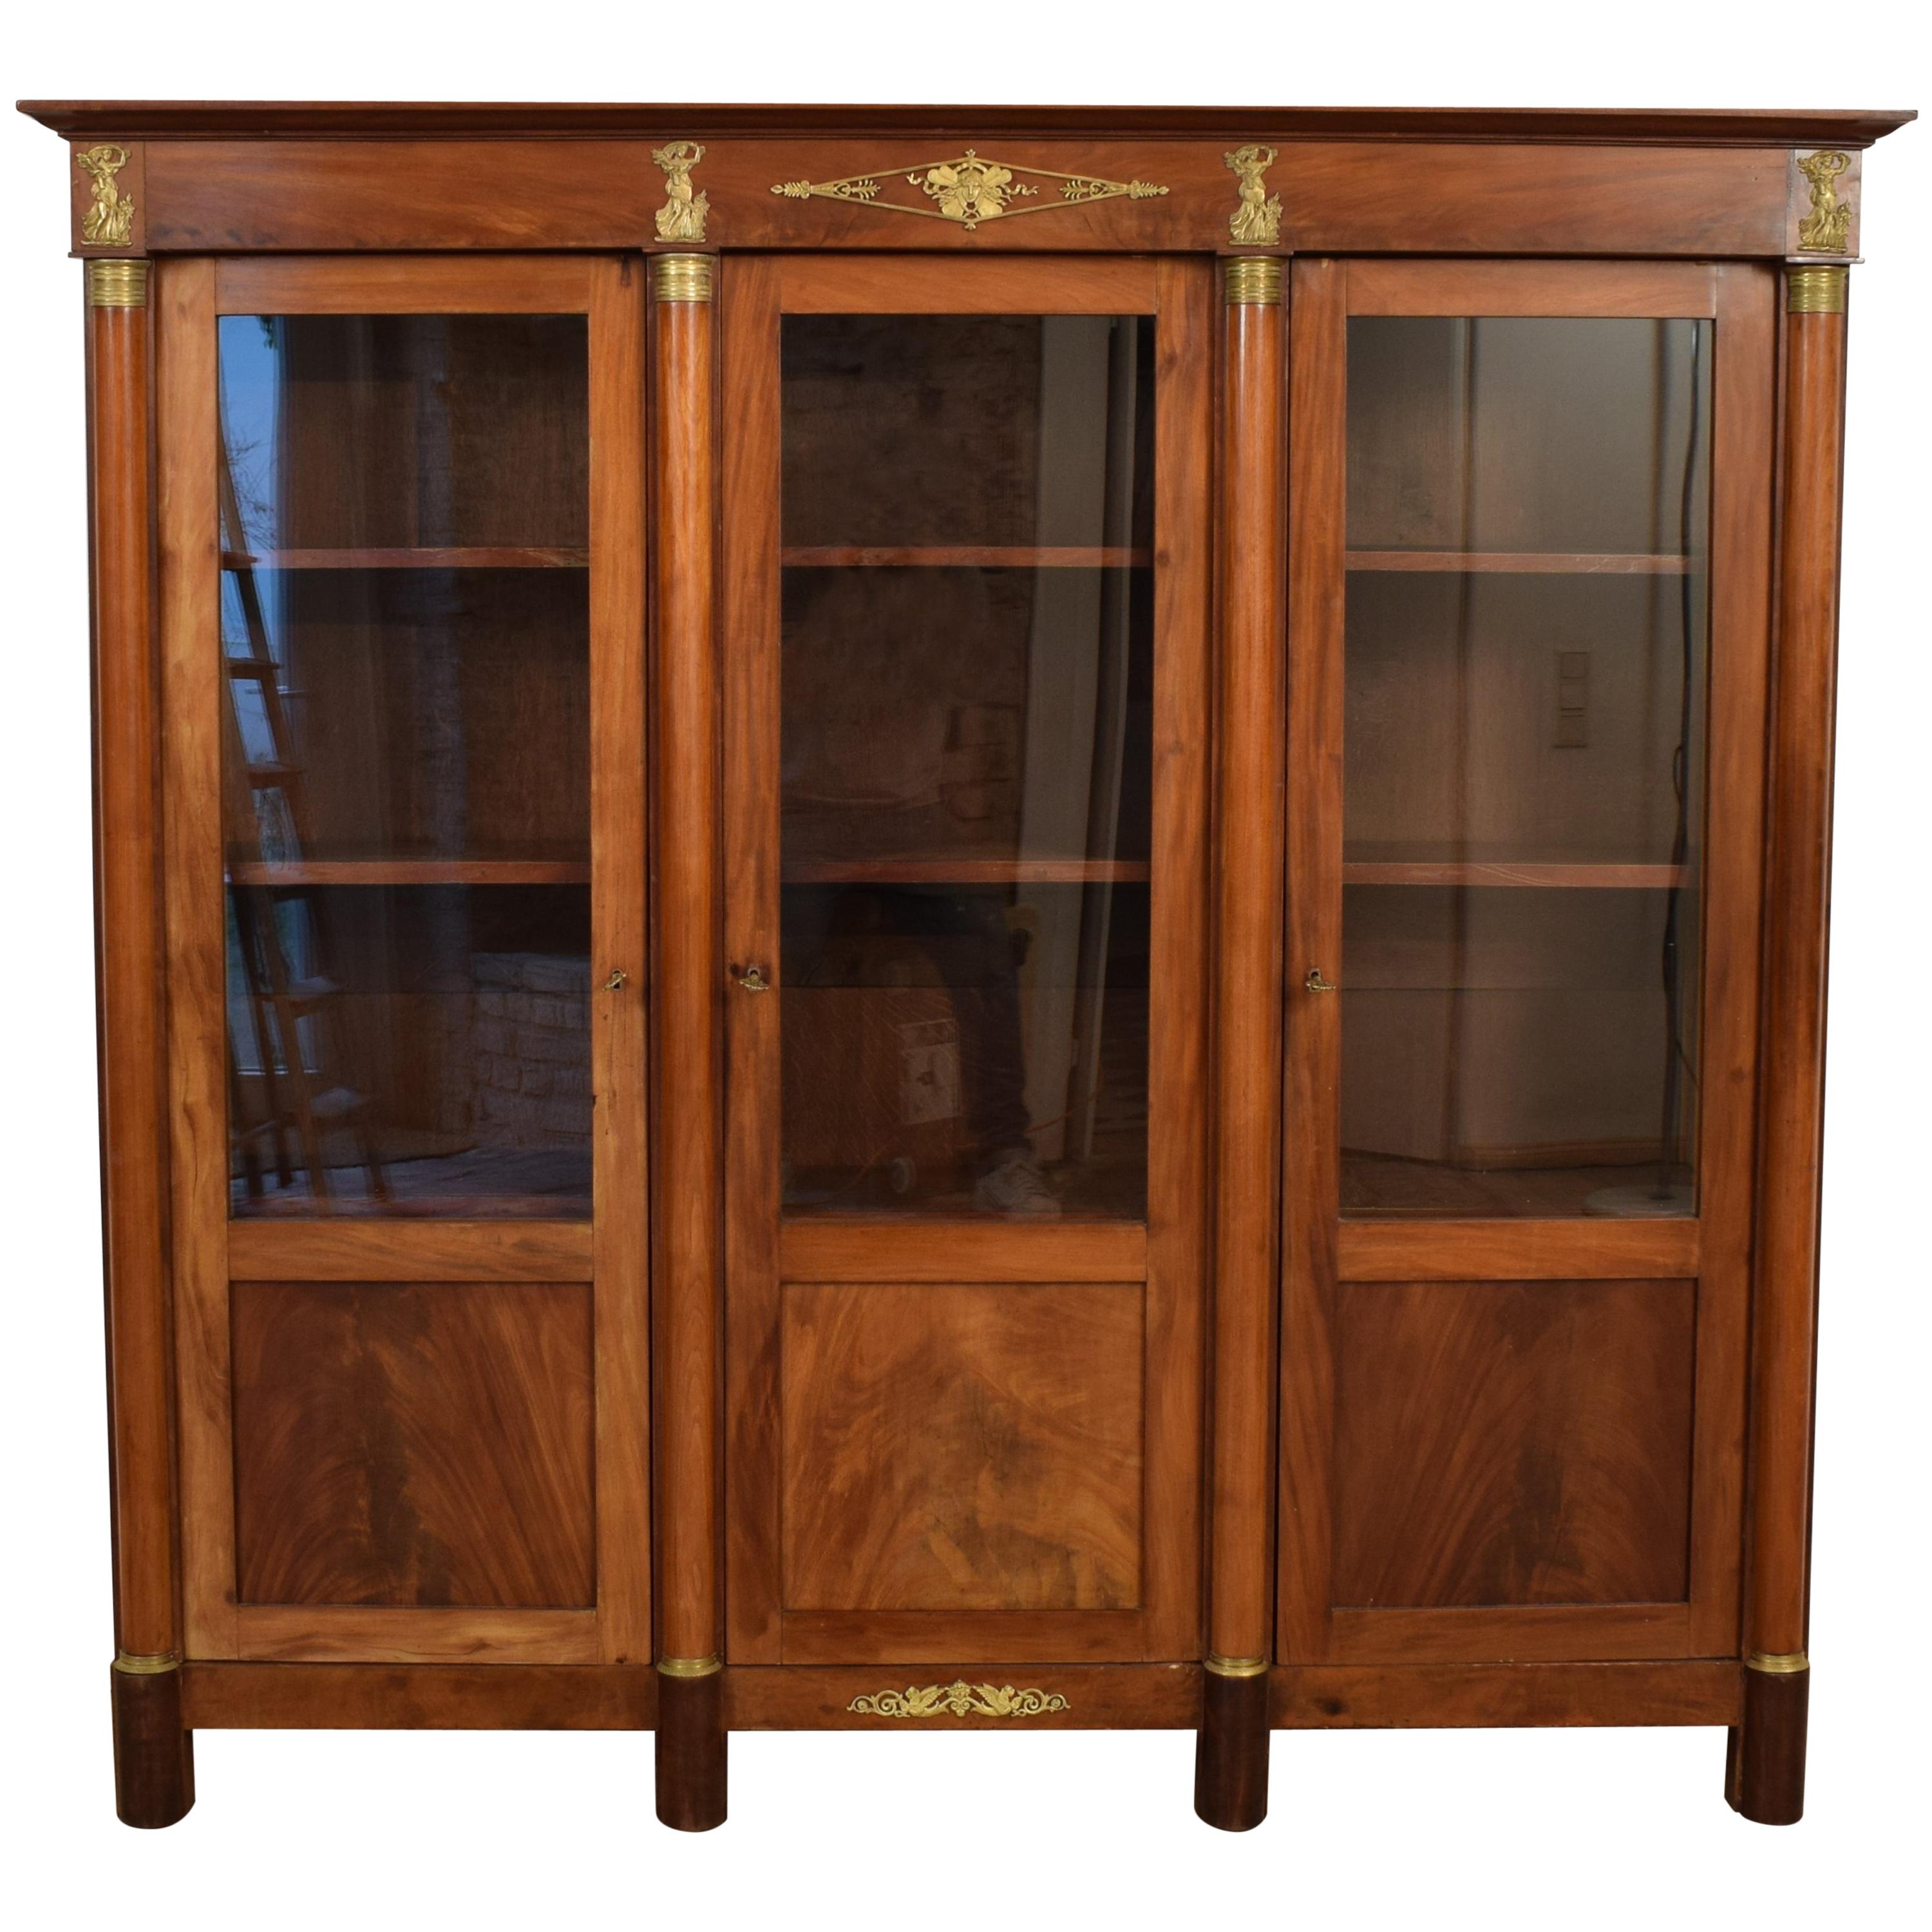 Early 19th Century Antique French Empire Mahogany Display Cabinet/Bookcase